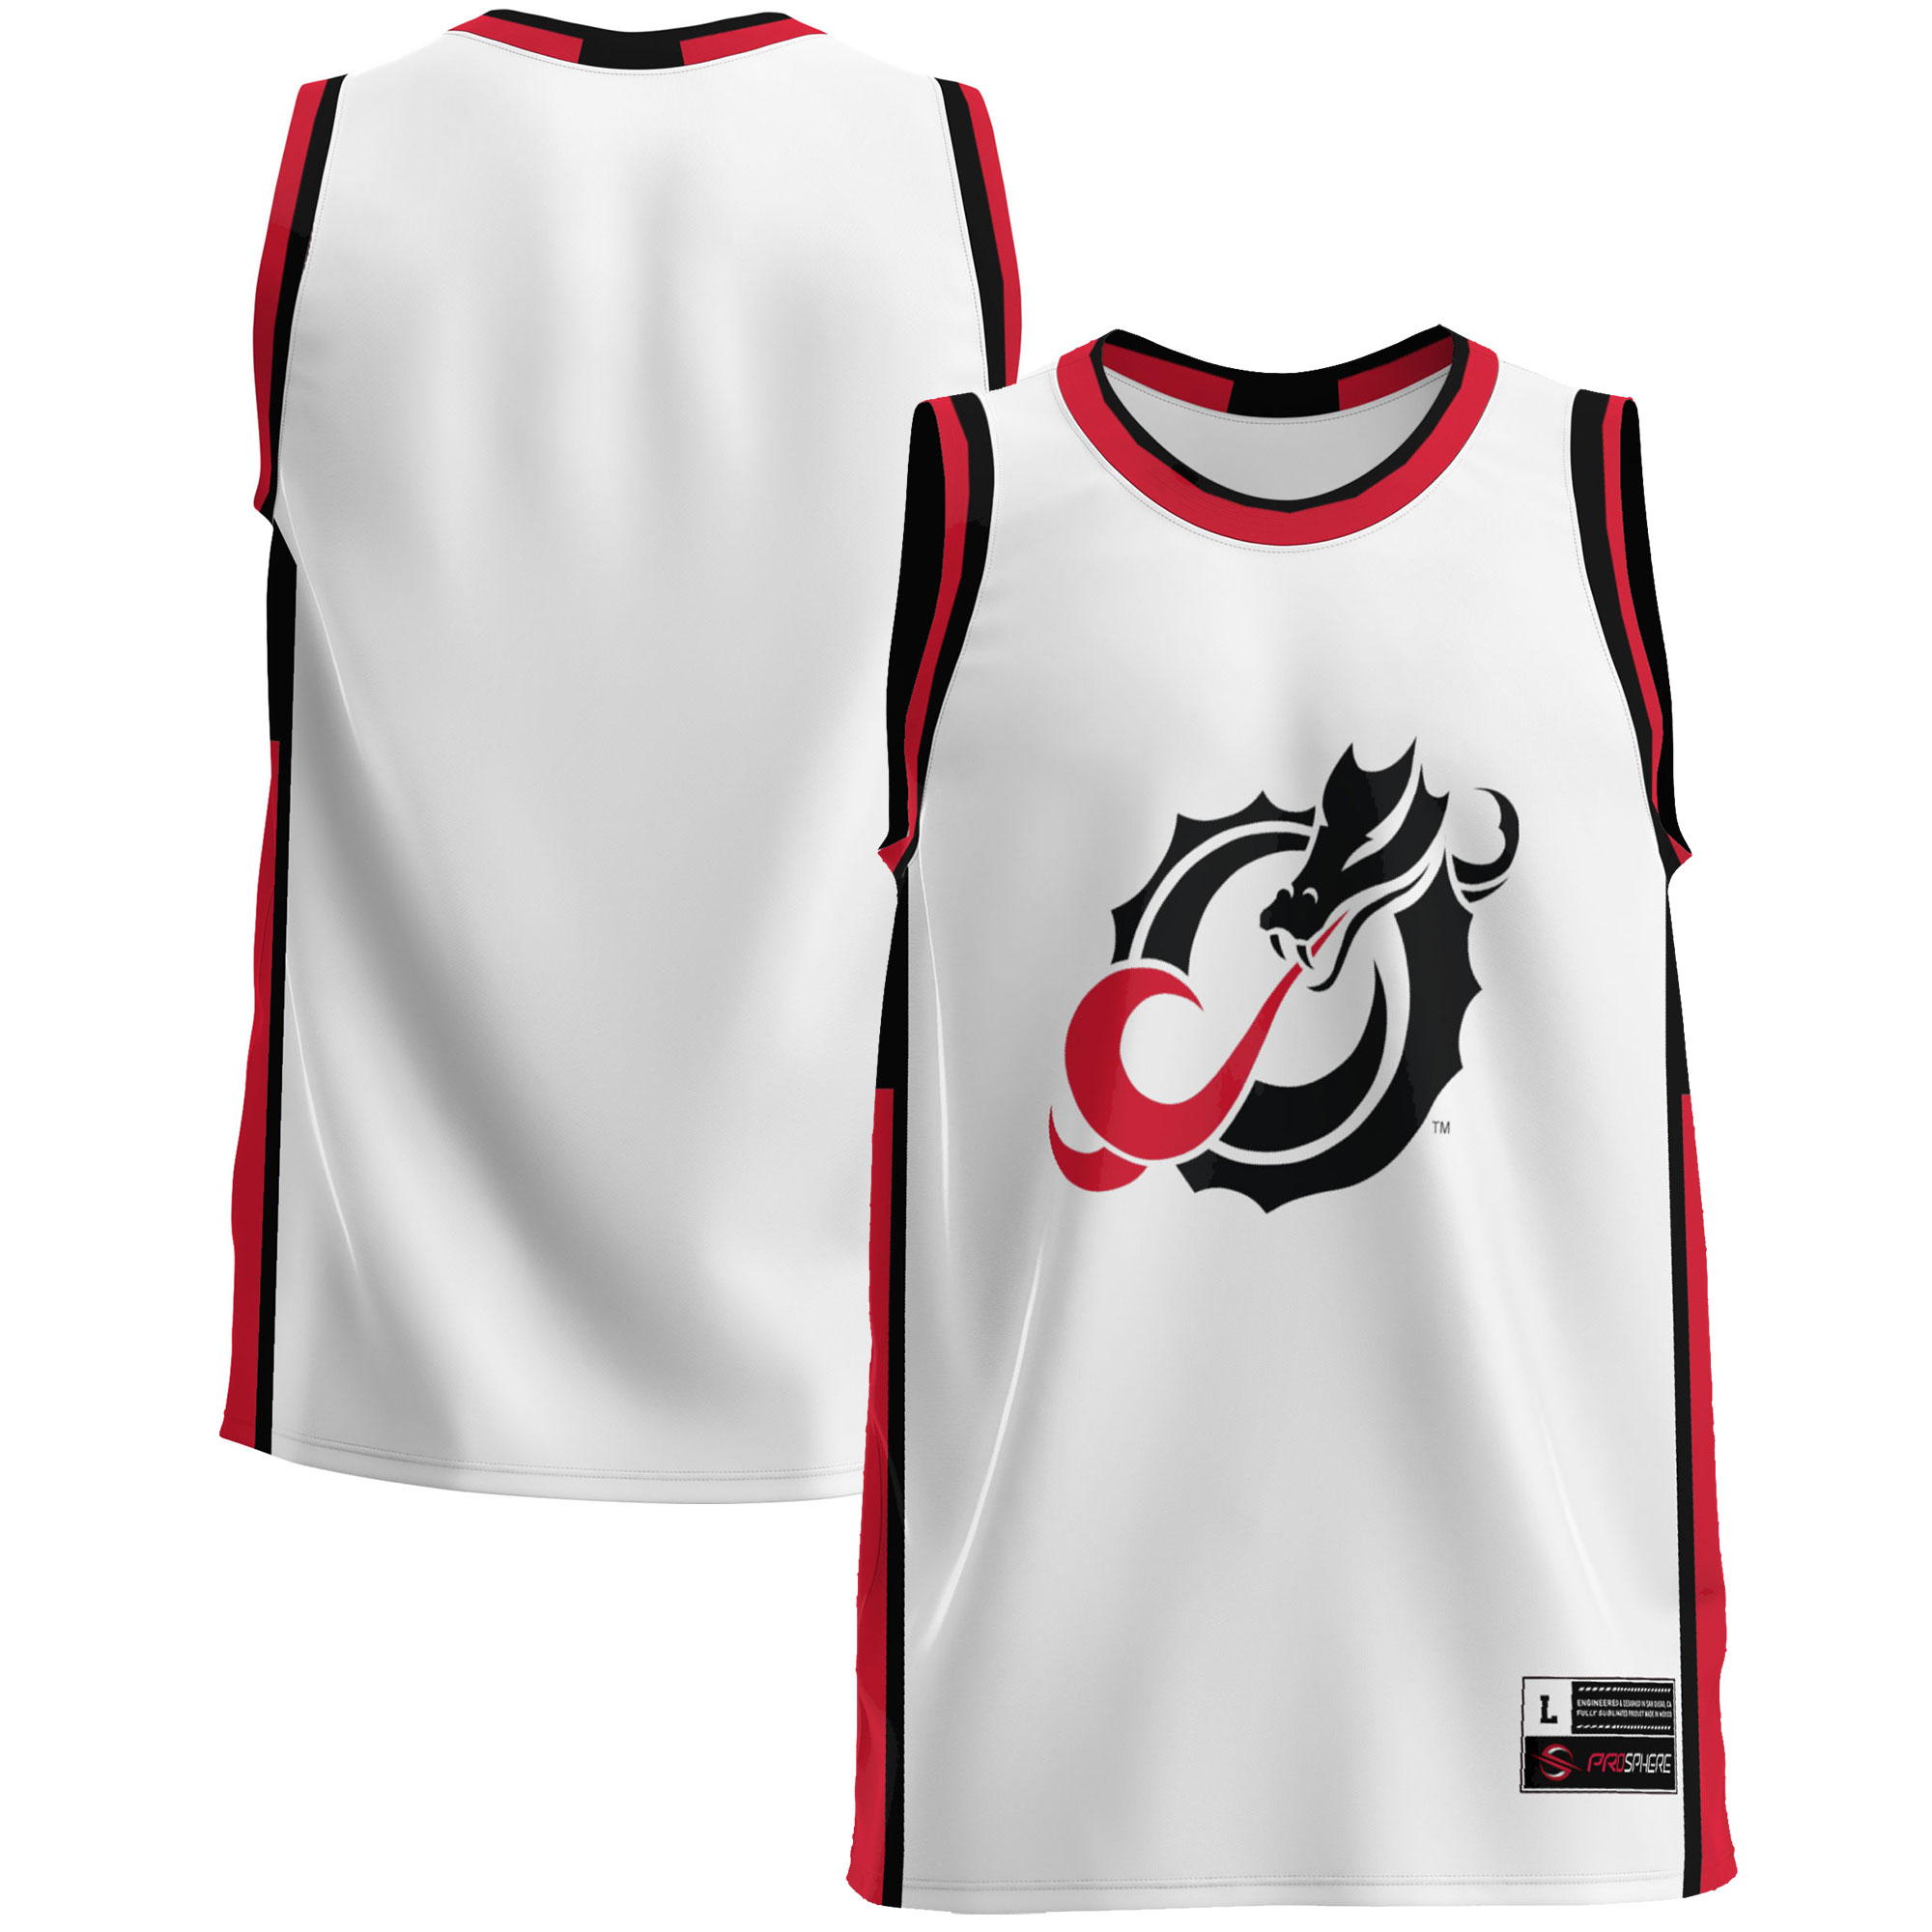 Minnesota State Moorhead Dragons Basketball Jersey - Red For Youth Women Men